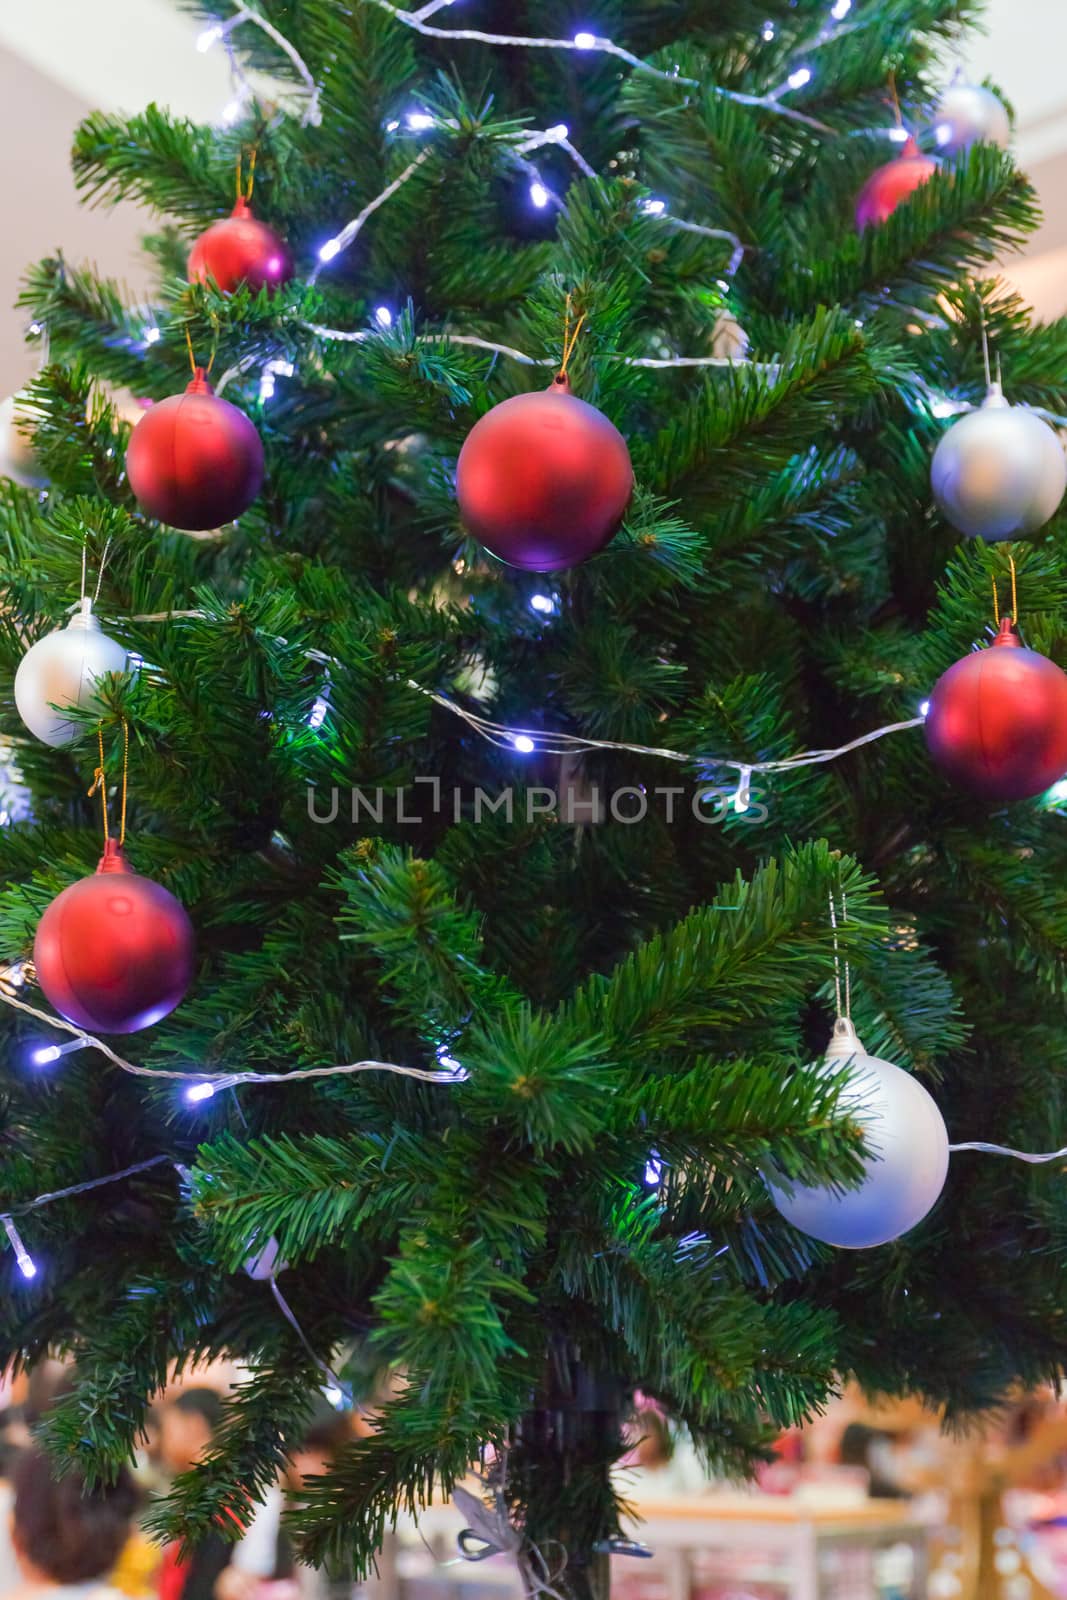 Background image of a Christmas tree decorated with lights by nikky1972